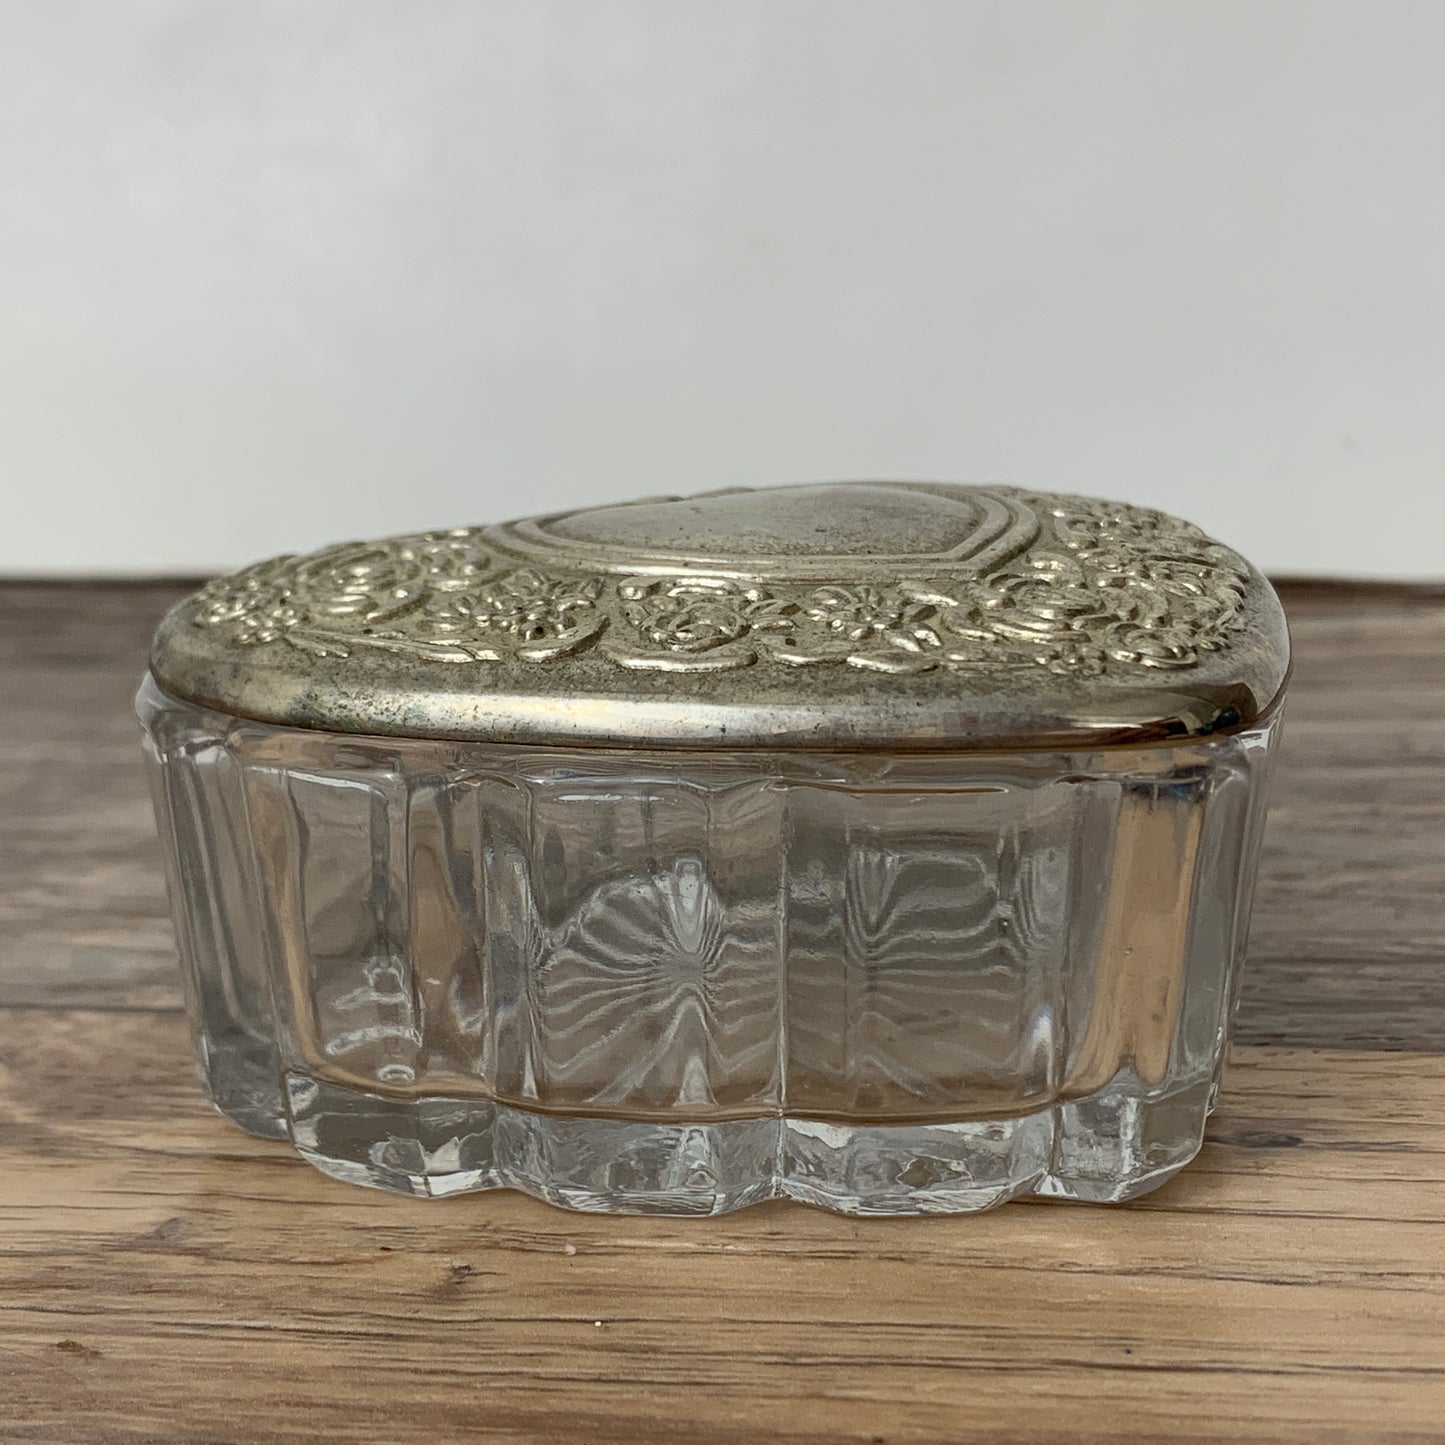 Heart Shaped Trinket Box with Silver Plated Lid